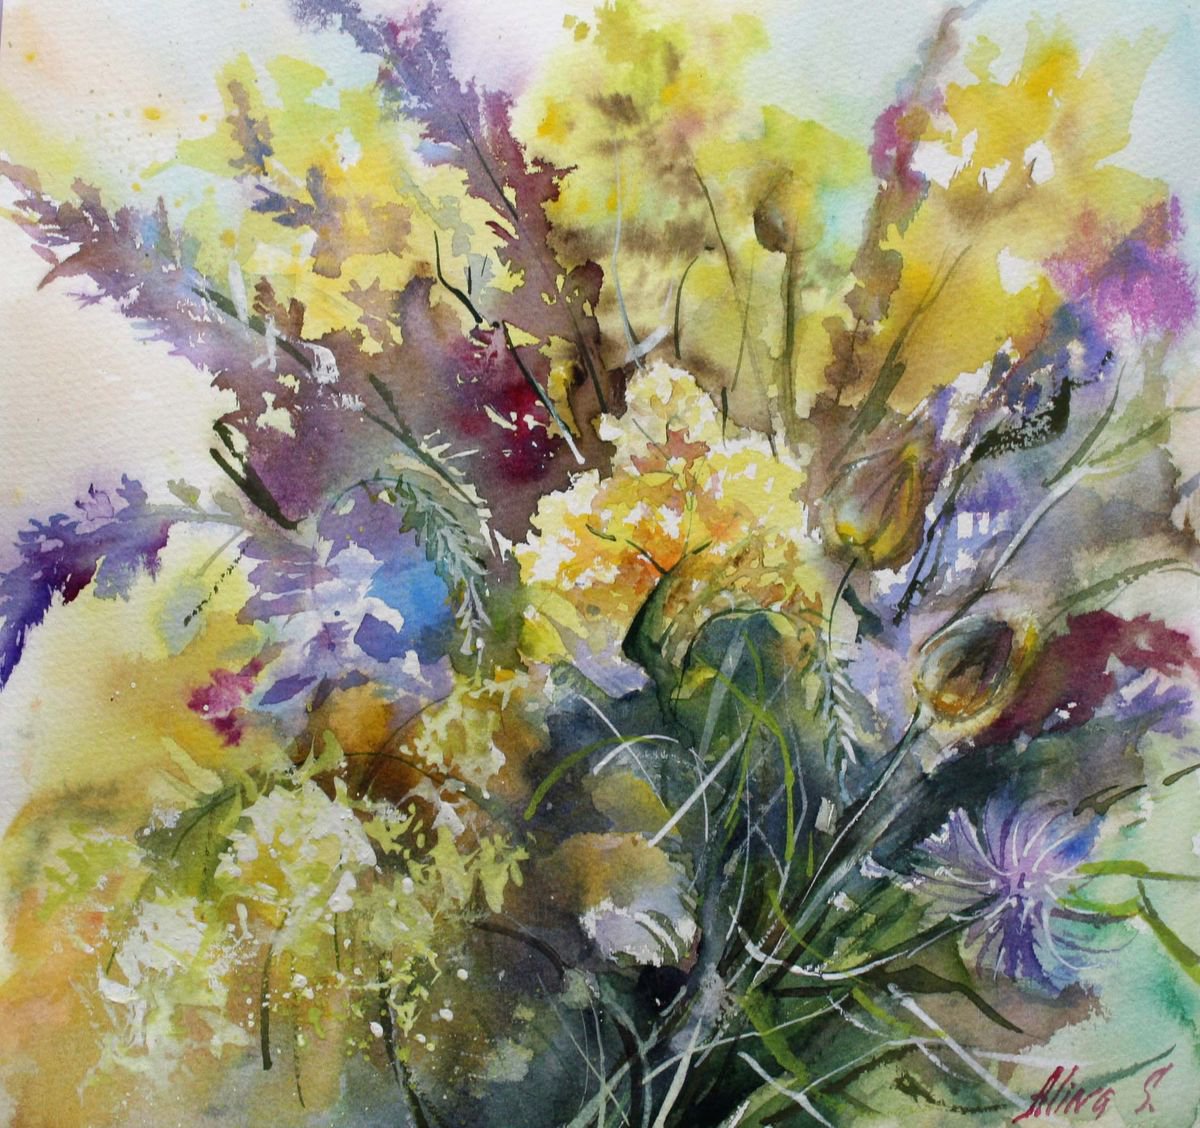 Original watercolor painting, abstract flowers, lupines wildflowers, floral wall art wall... by Alina Shmygol